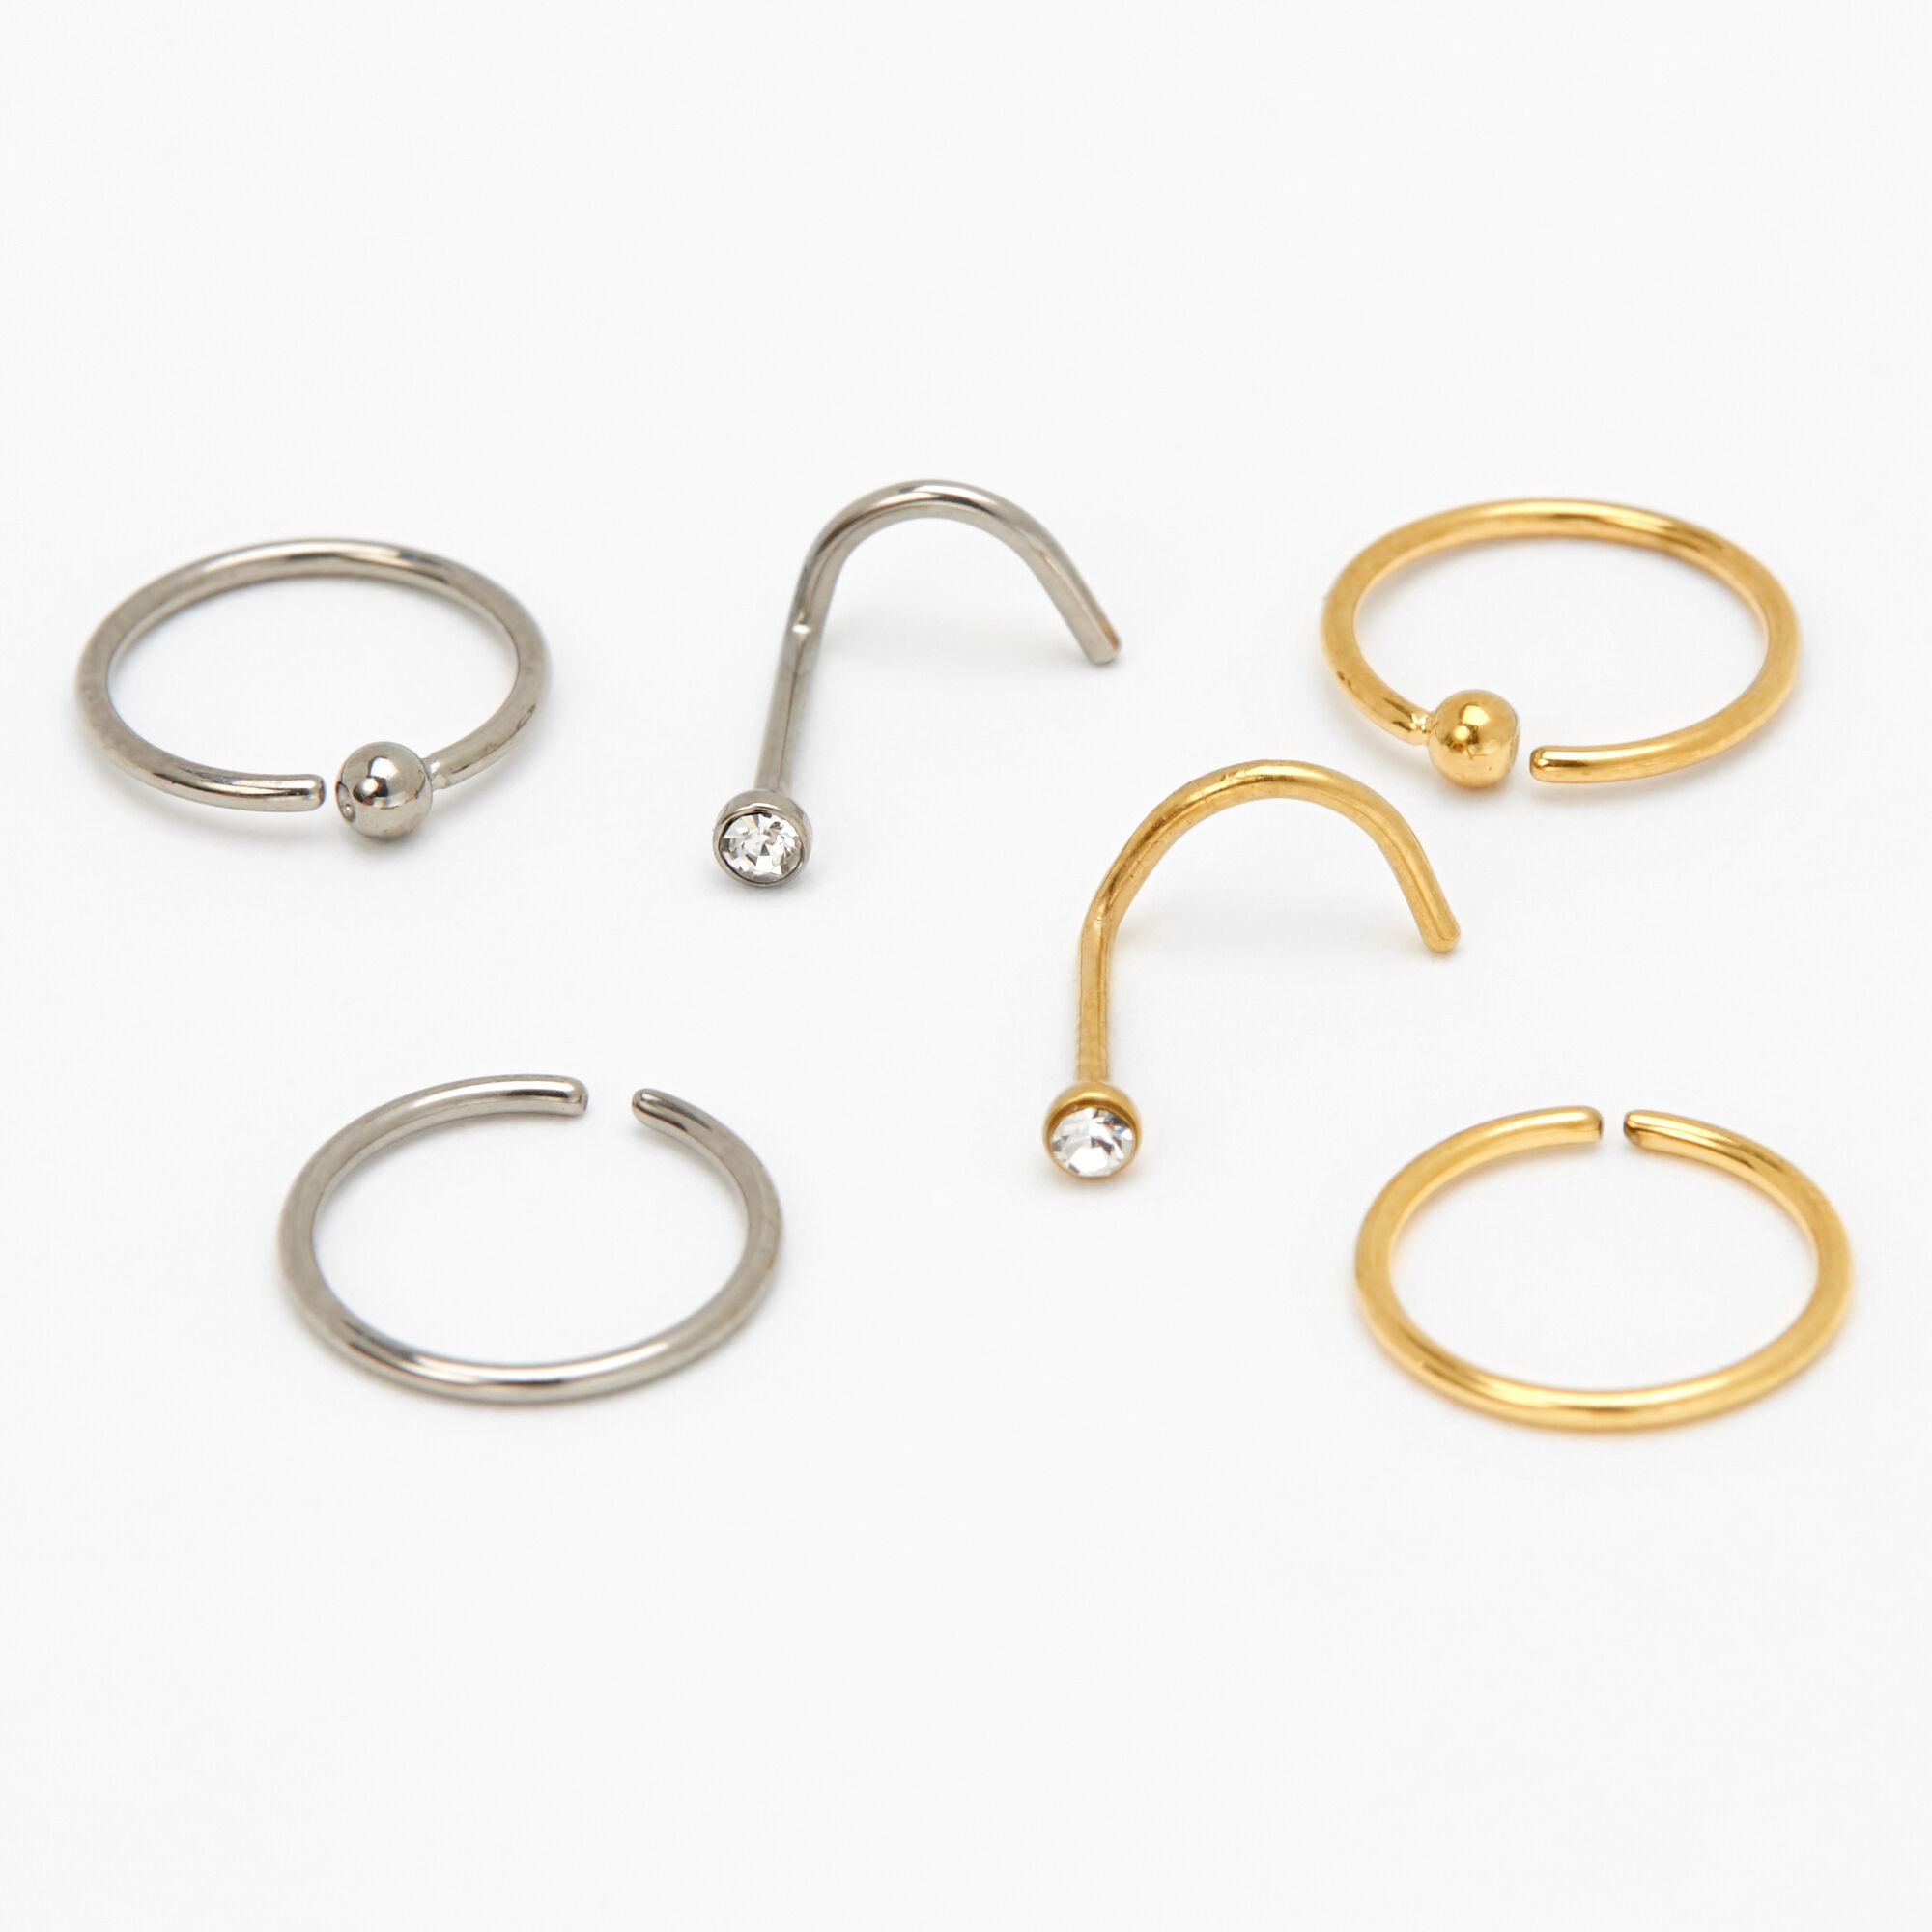 View Claires Mixed Metal Titanium 20G Crystal Ball Stud Hoop Nose Rings 6 Pack Gold information